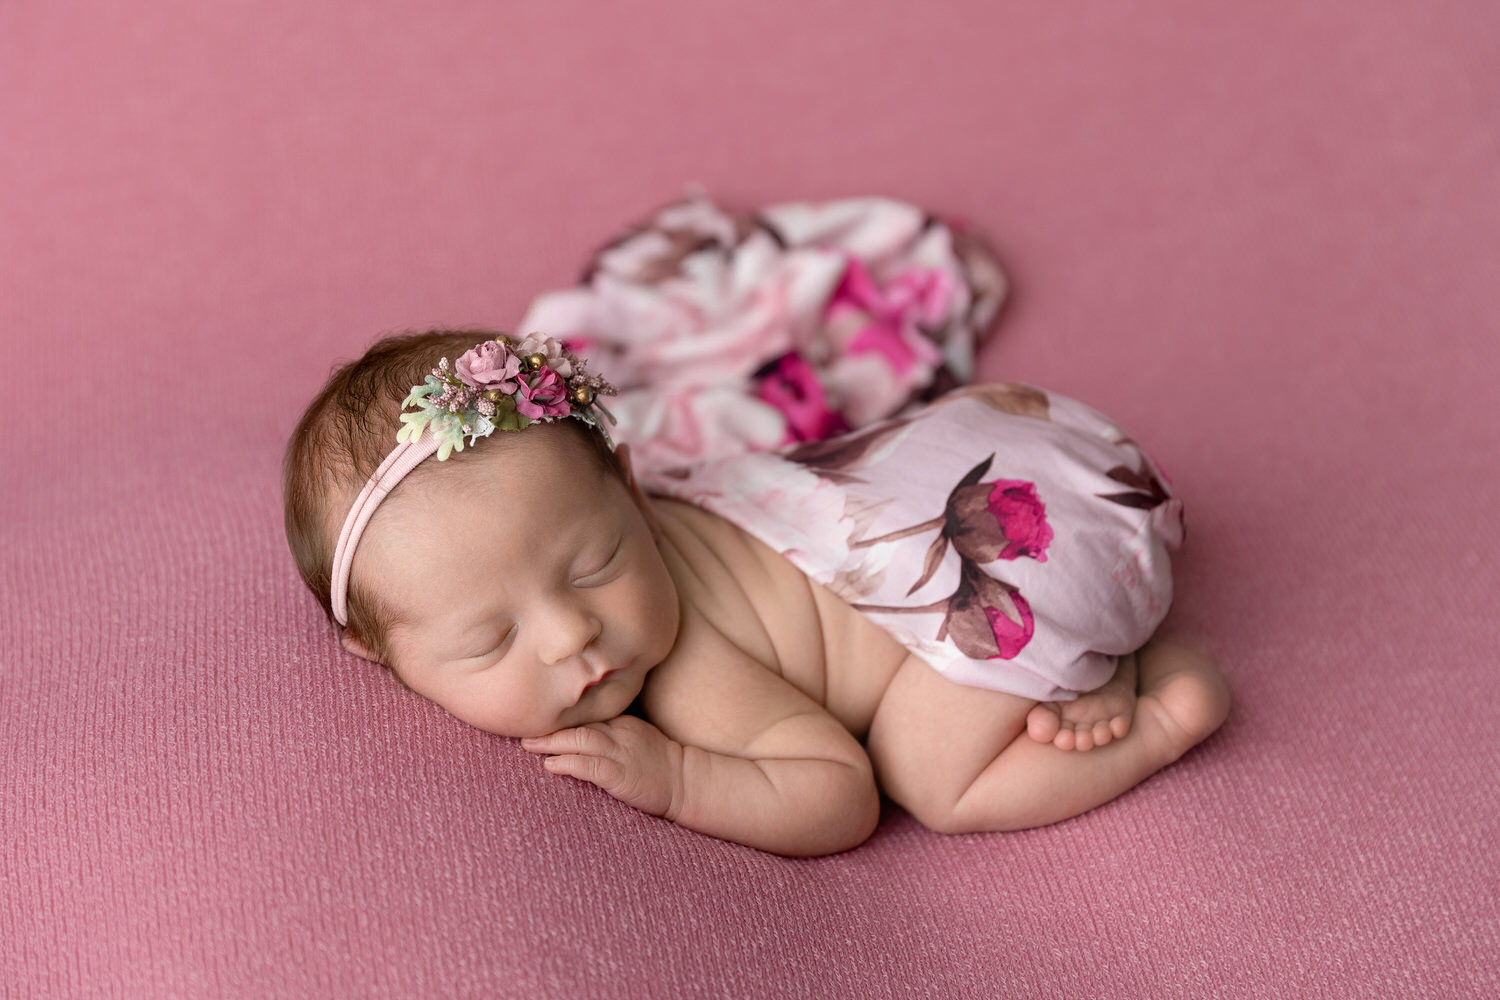 Newborn baby girl sleeps on her belly wrapped in floral fabric on a pink background.